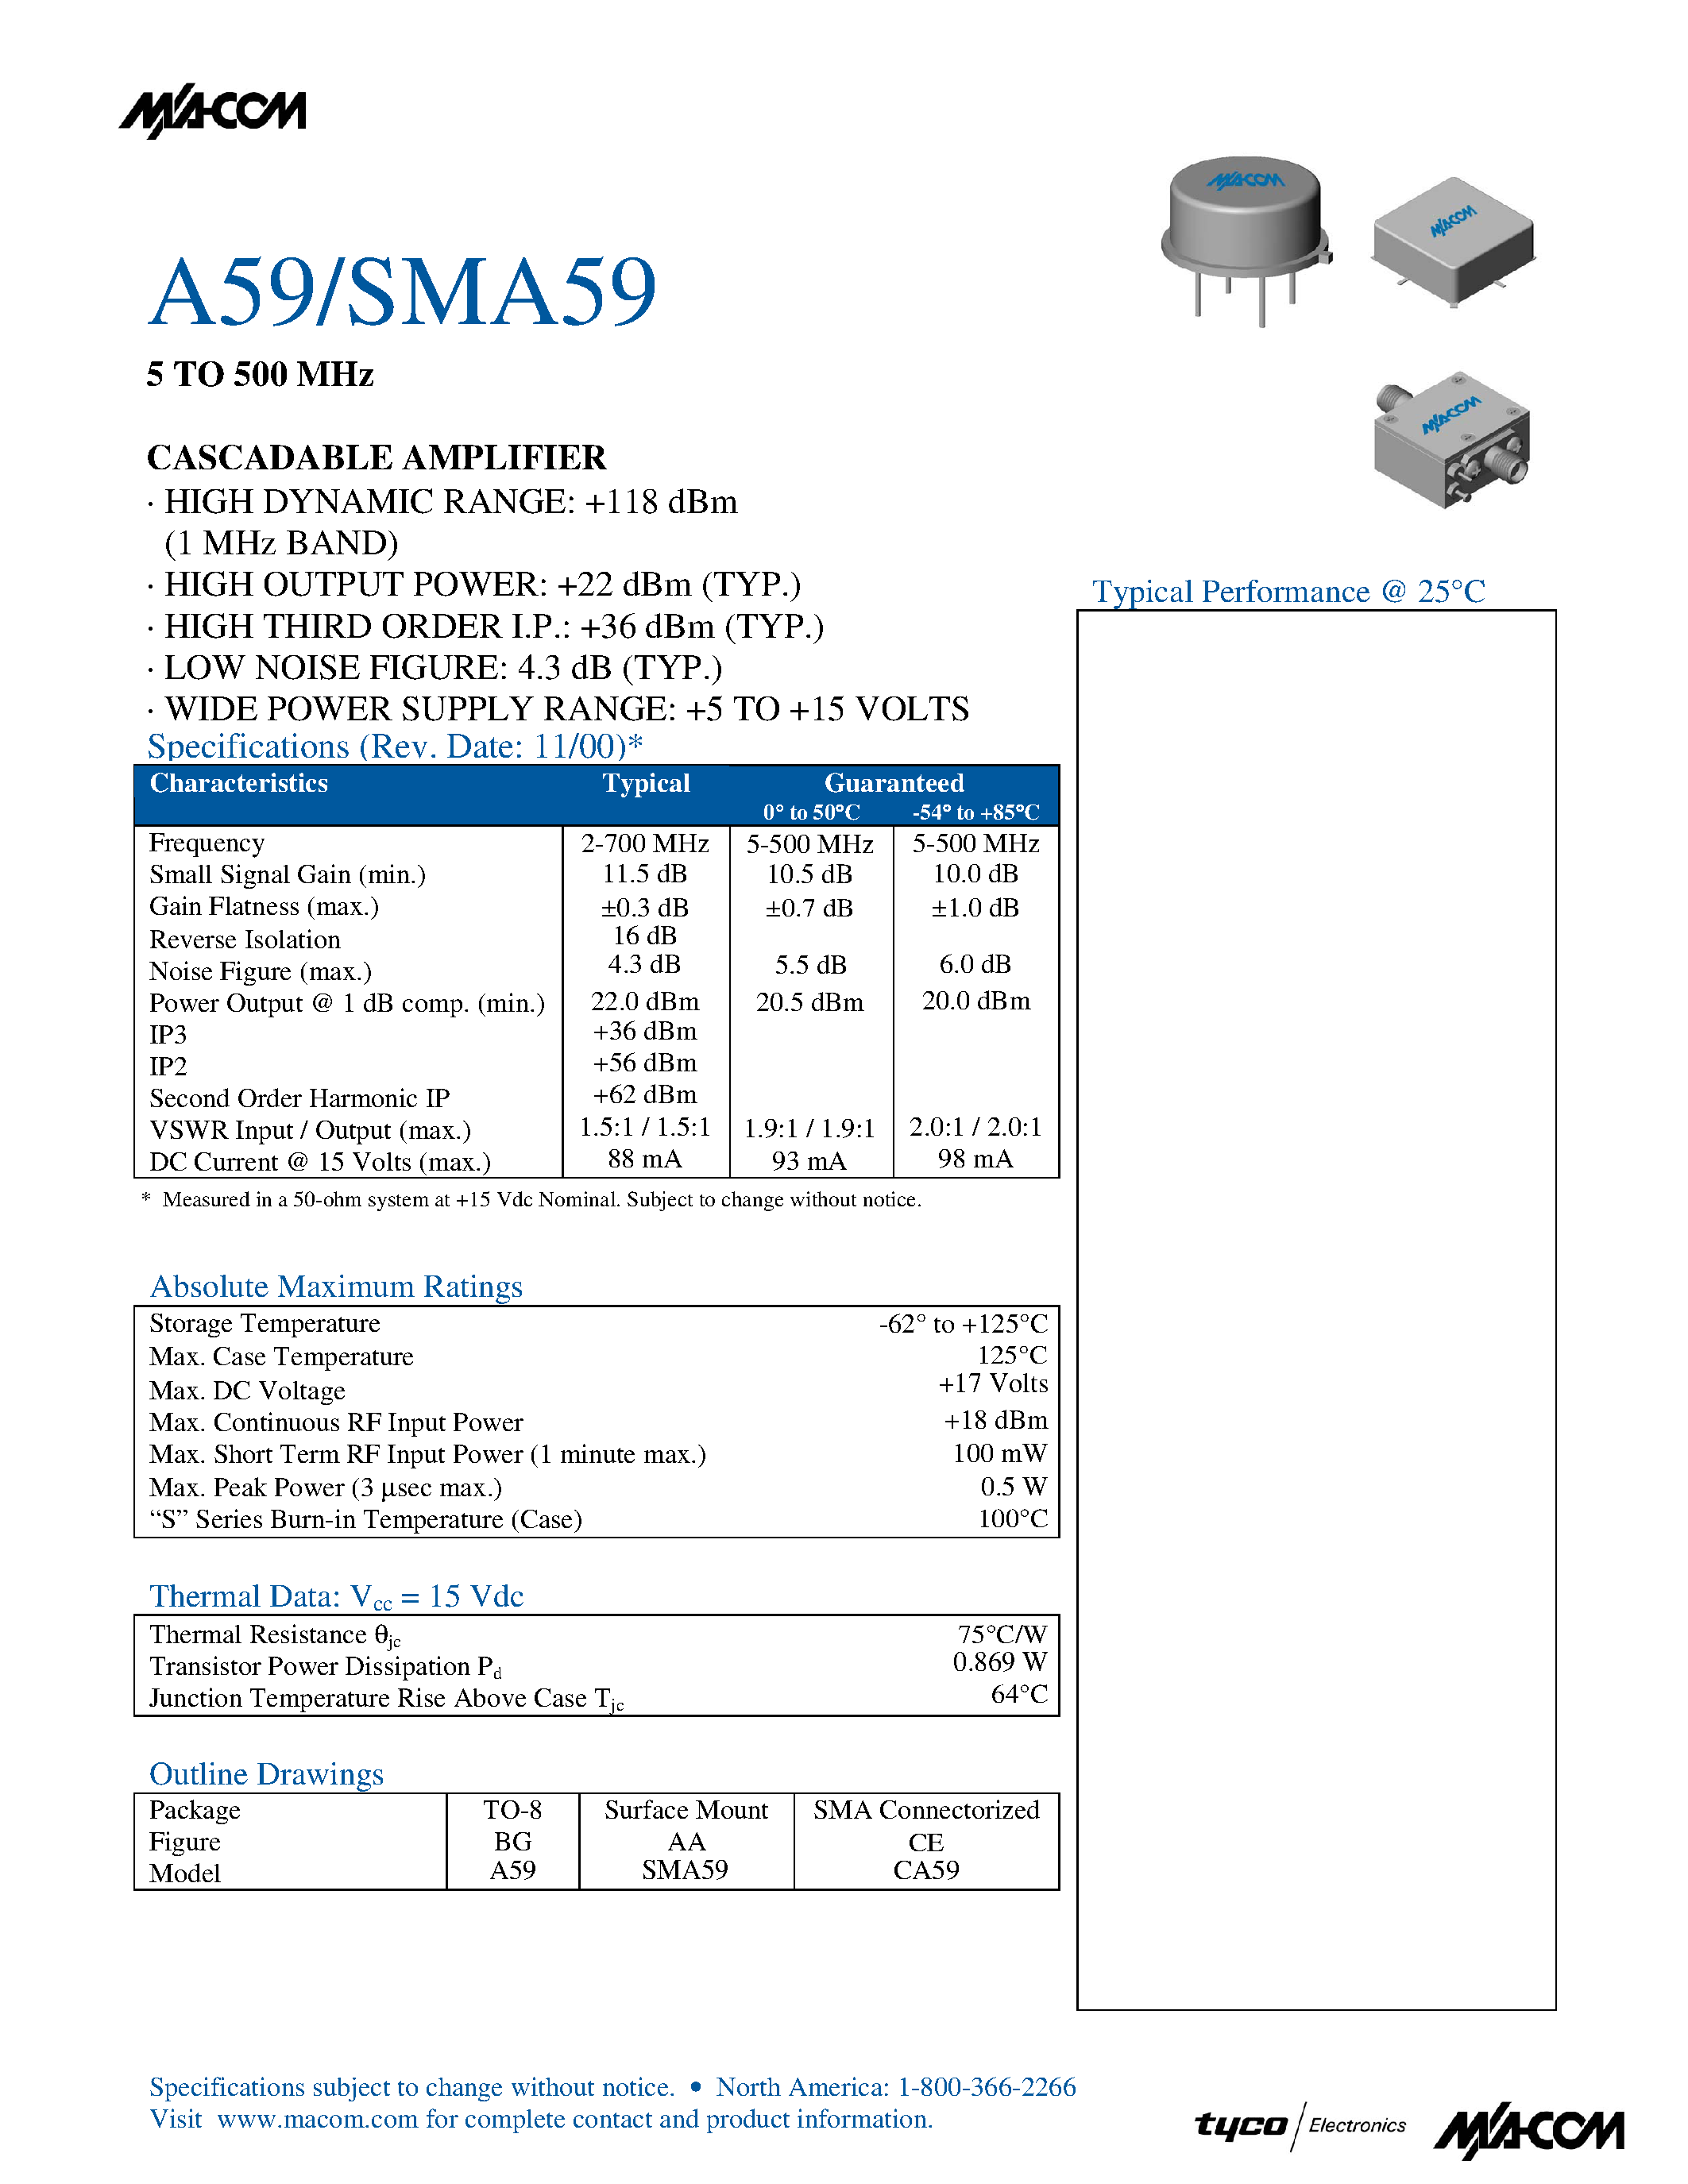 Даташит A61 - 2 TO 6 GHz CASCADABLE AMPLIFIER страница 1